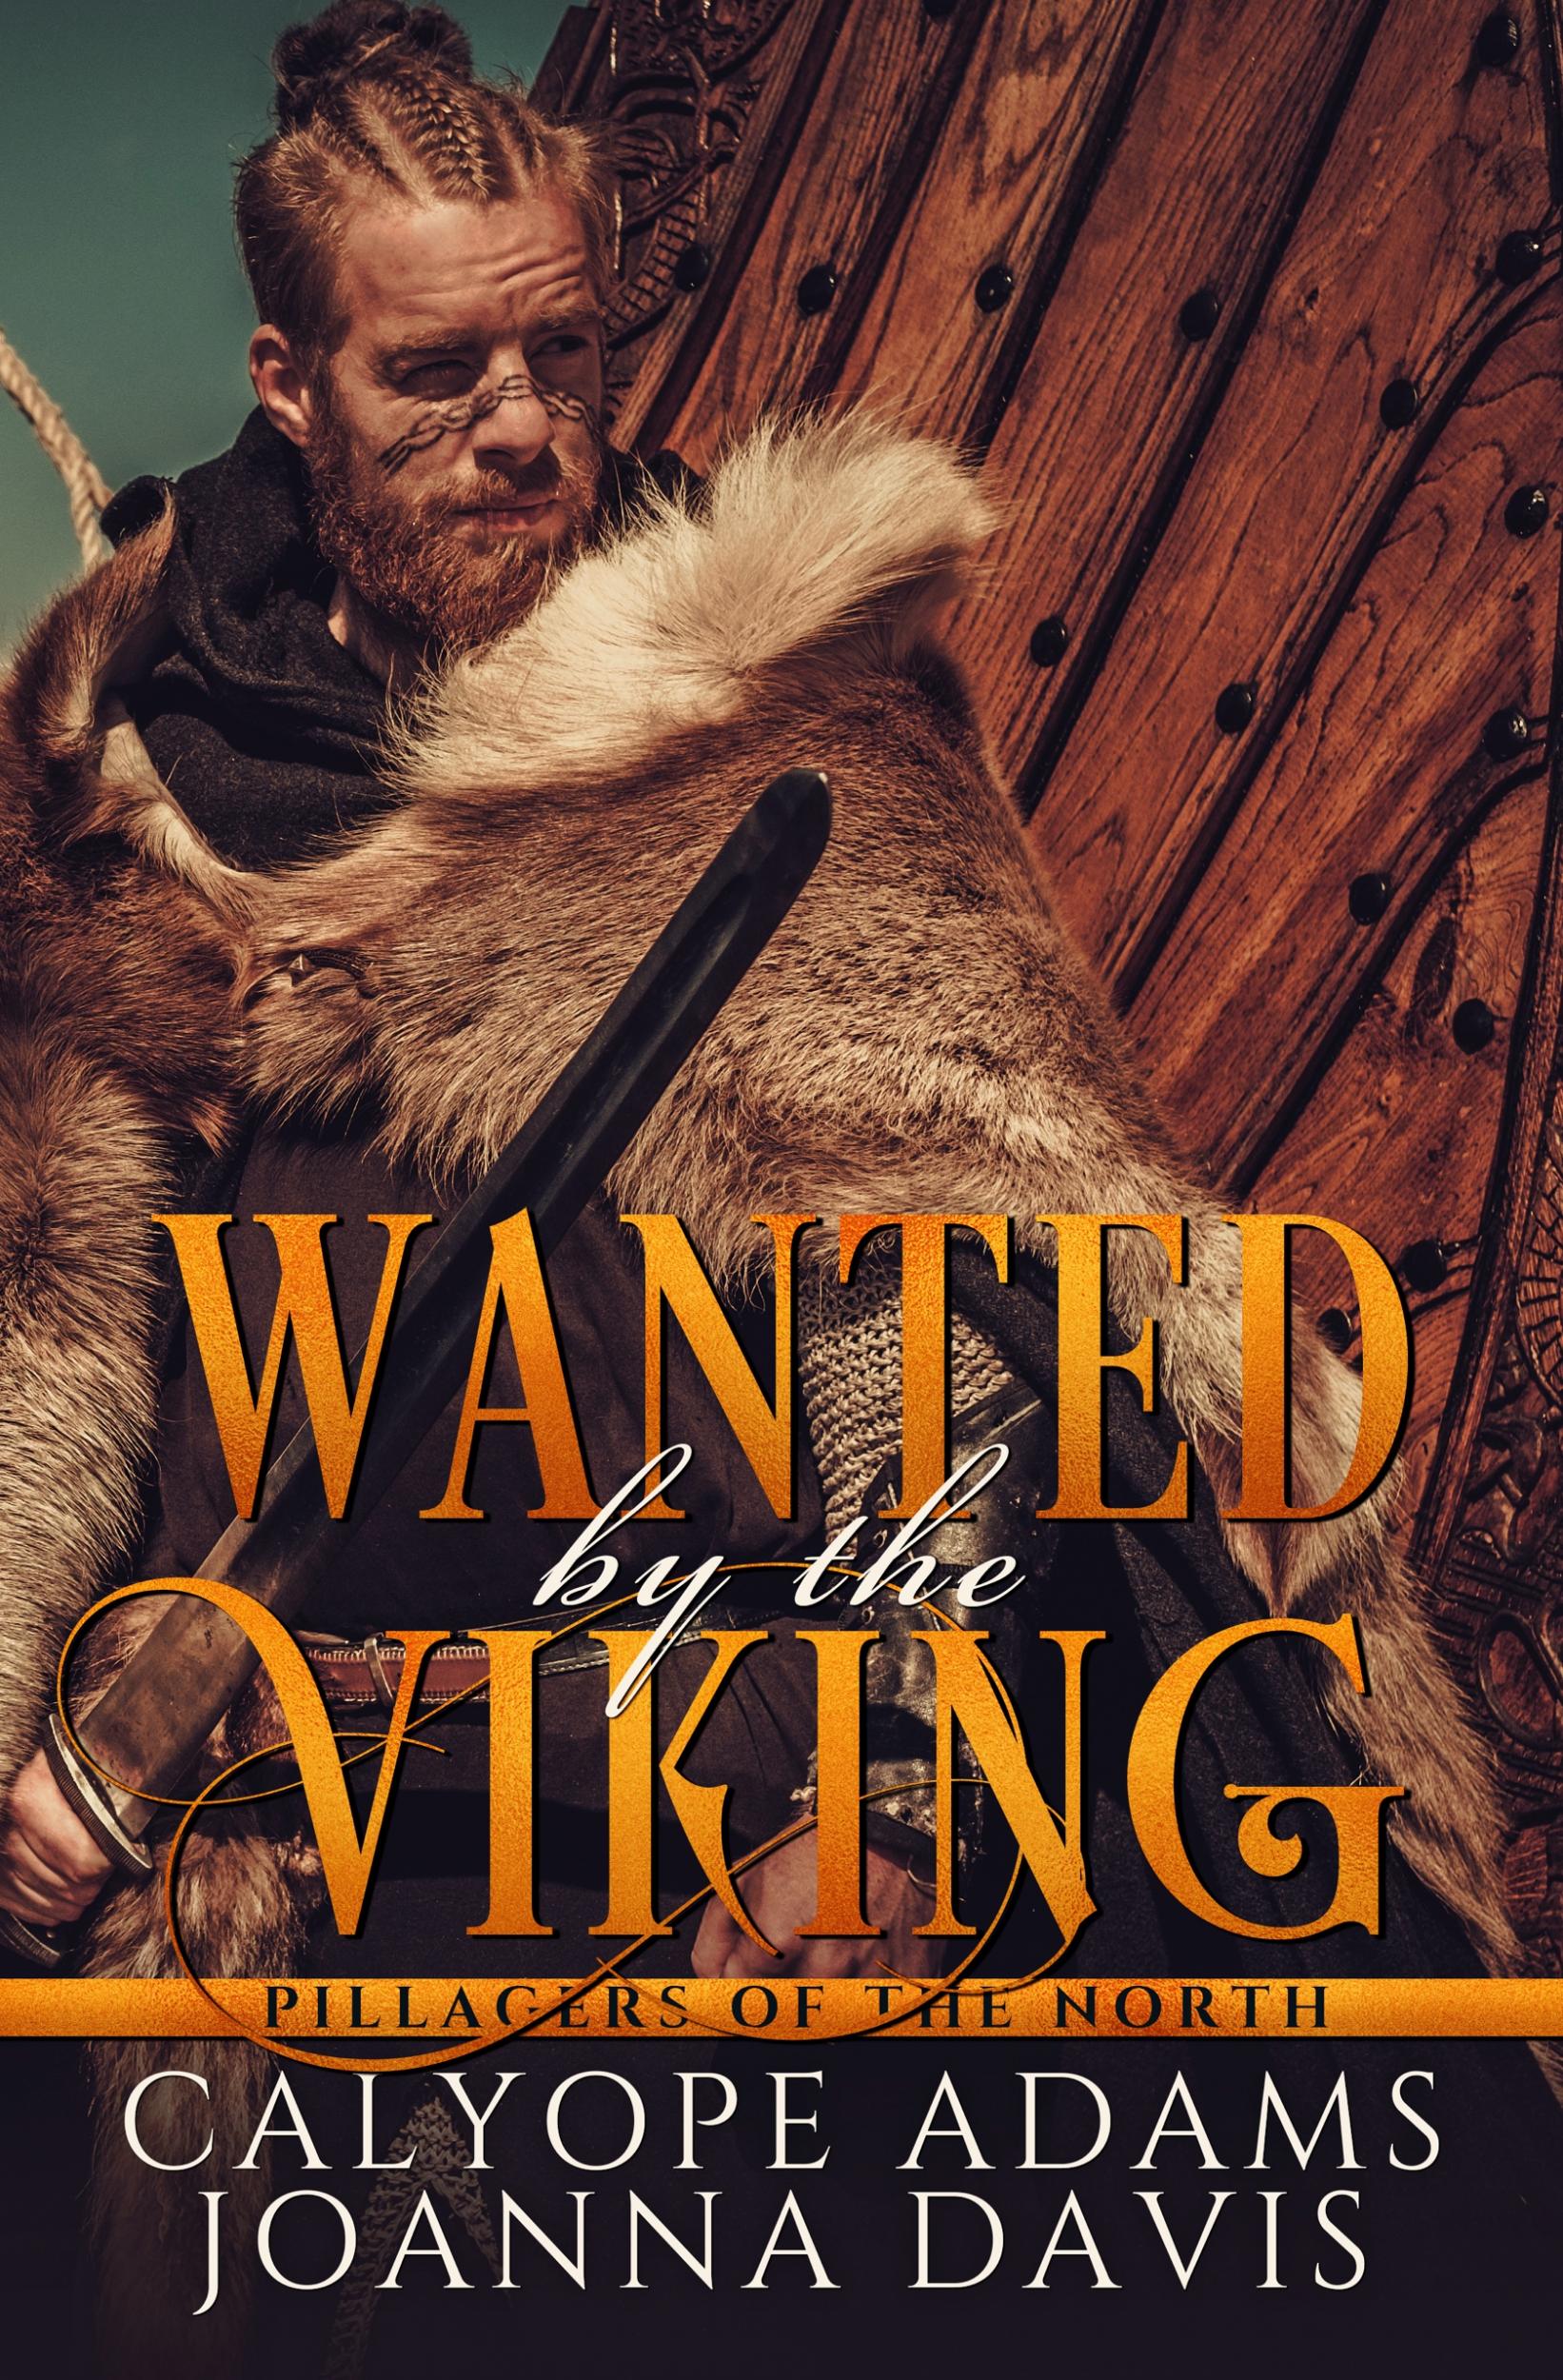 Get your free copy of Wanted By The Viking by Calyope Adams | Booksprout